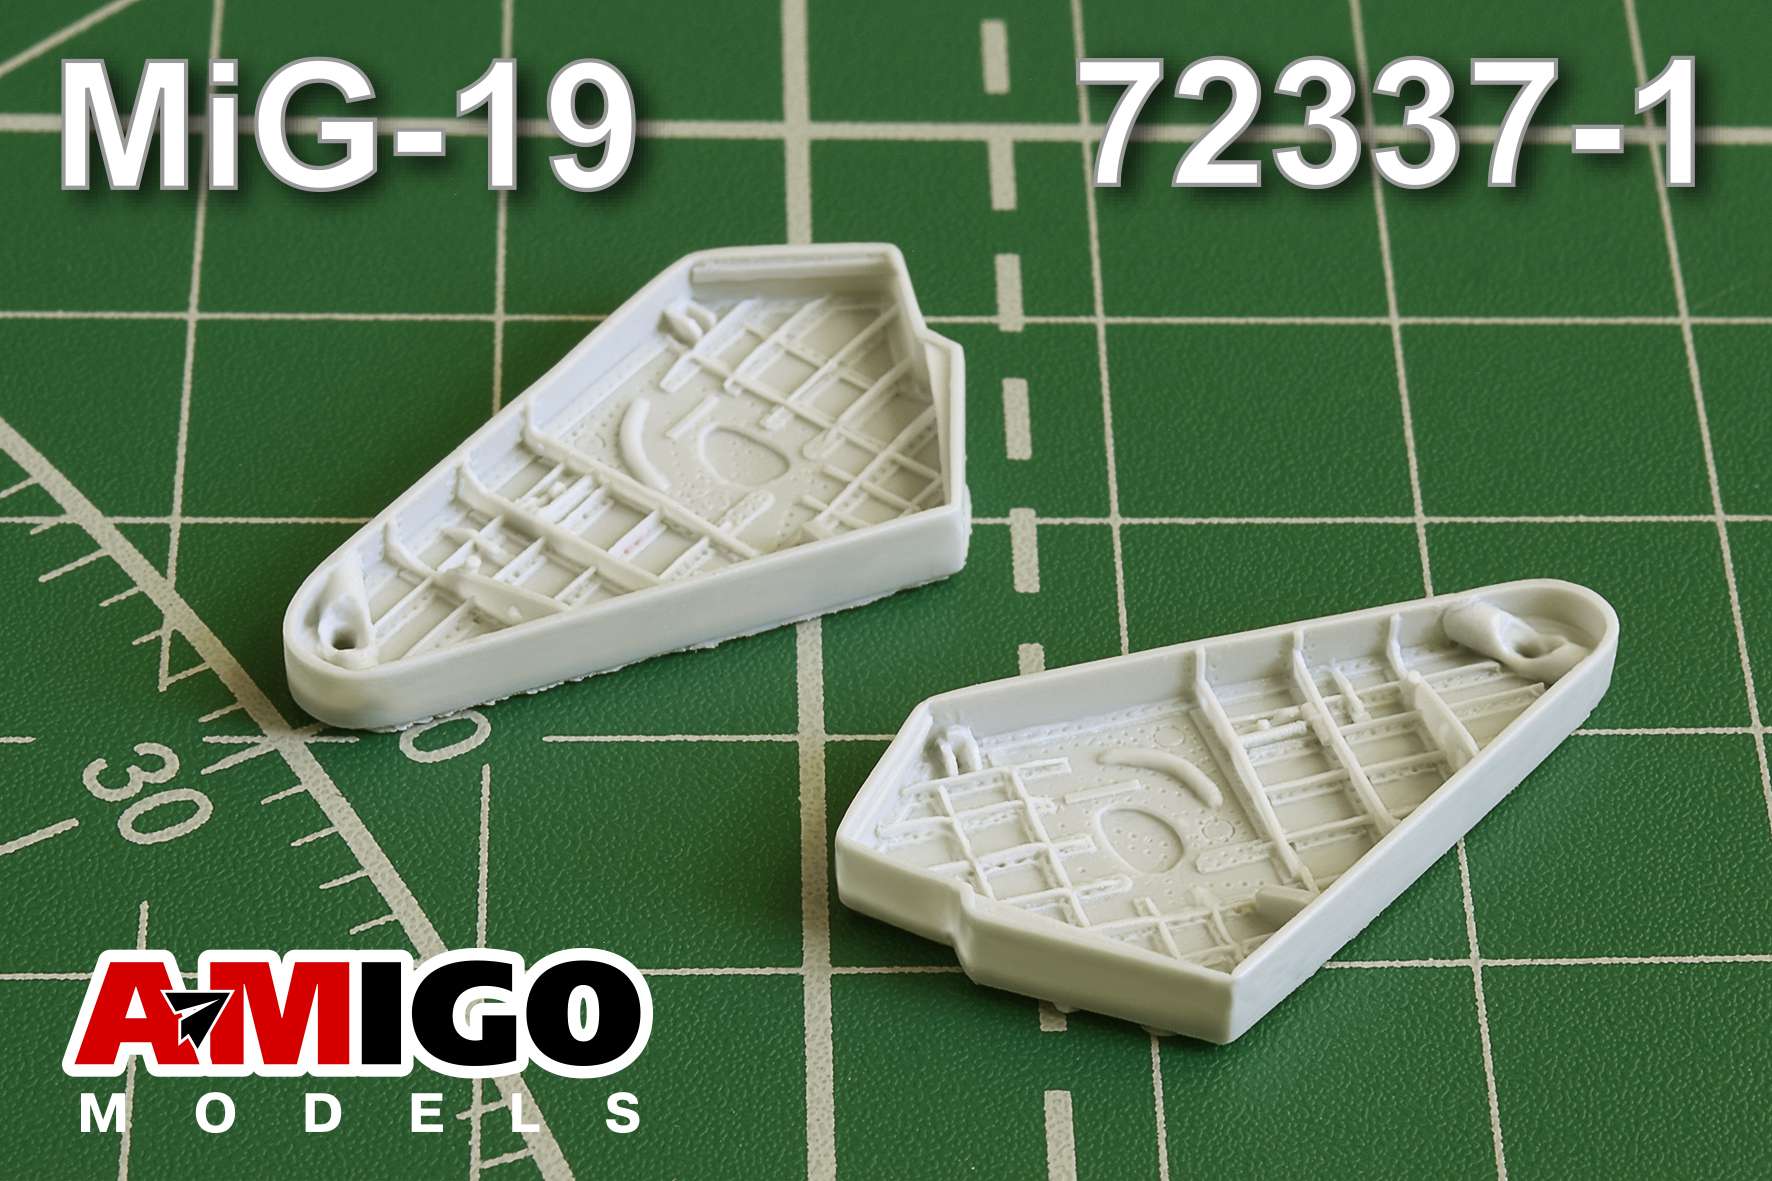 Additions (3D resin printing) 1/72 MiG-19S aircraft landing gear niches (Amigo Models) 